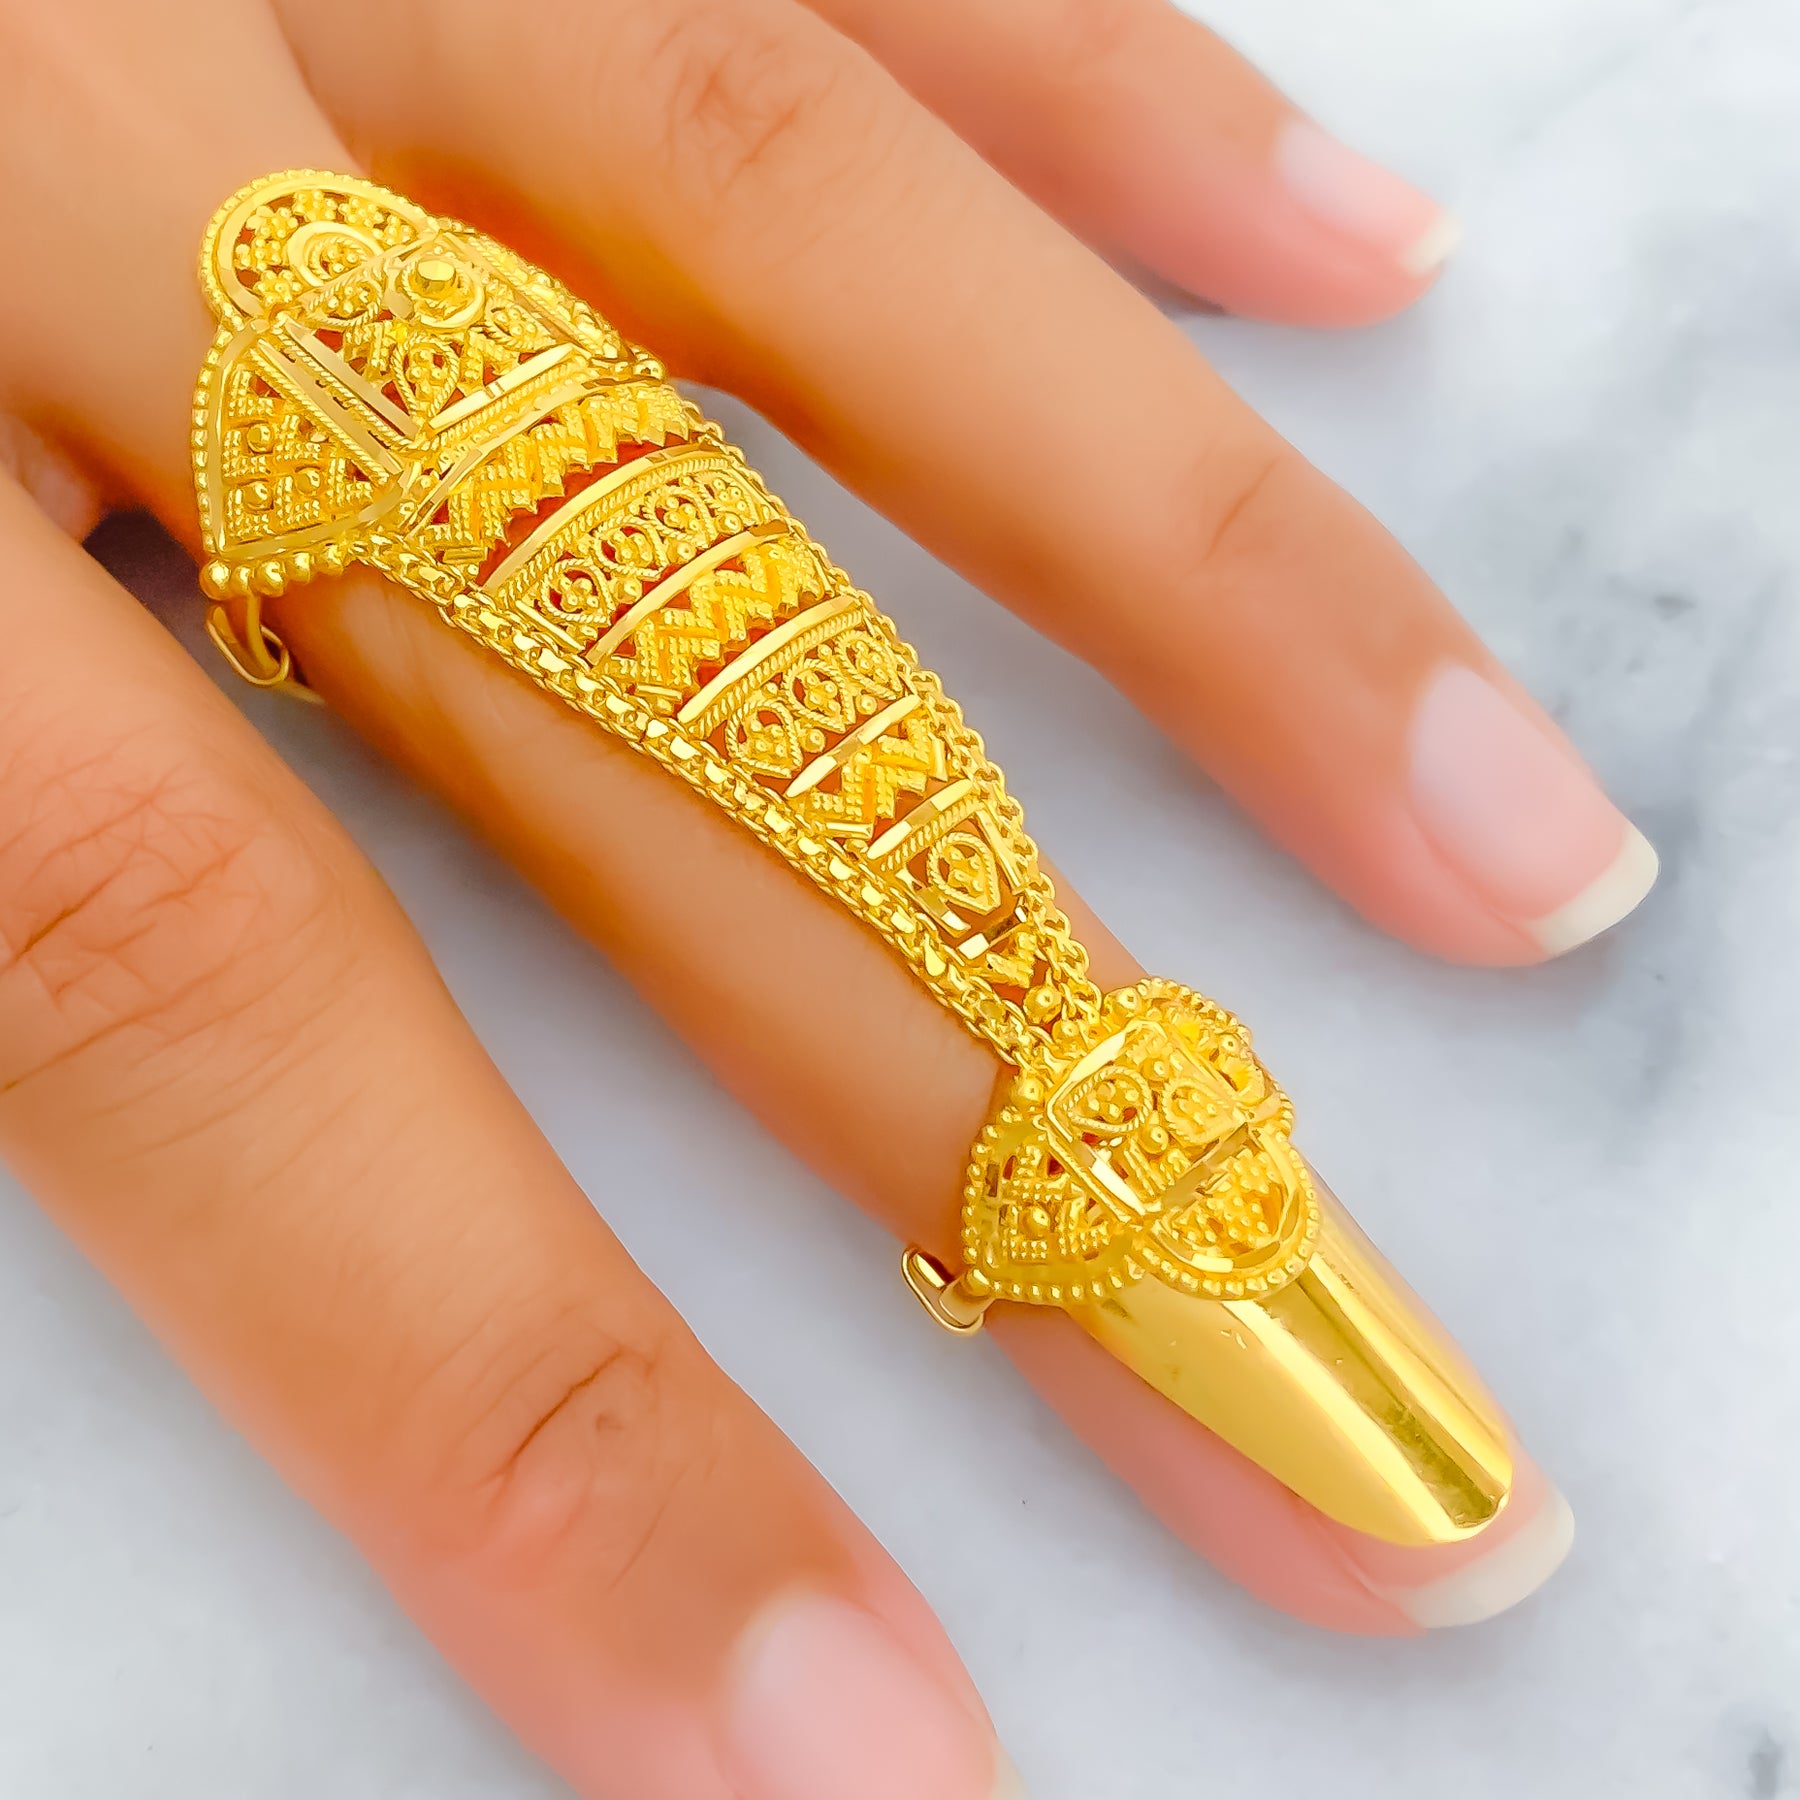 Peacock Design Golden (Base) Artificial Alloy Finger Ring, Size: 1inch  (dia) at Rs 200 in New Delhi